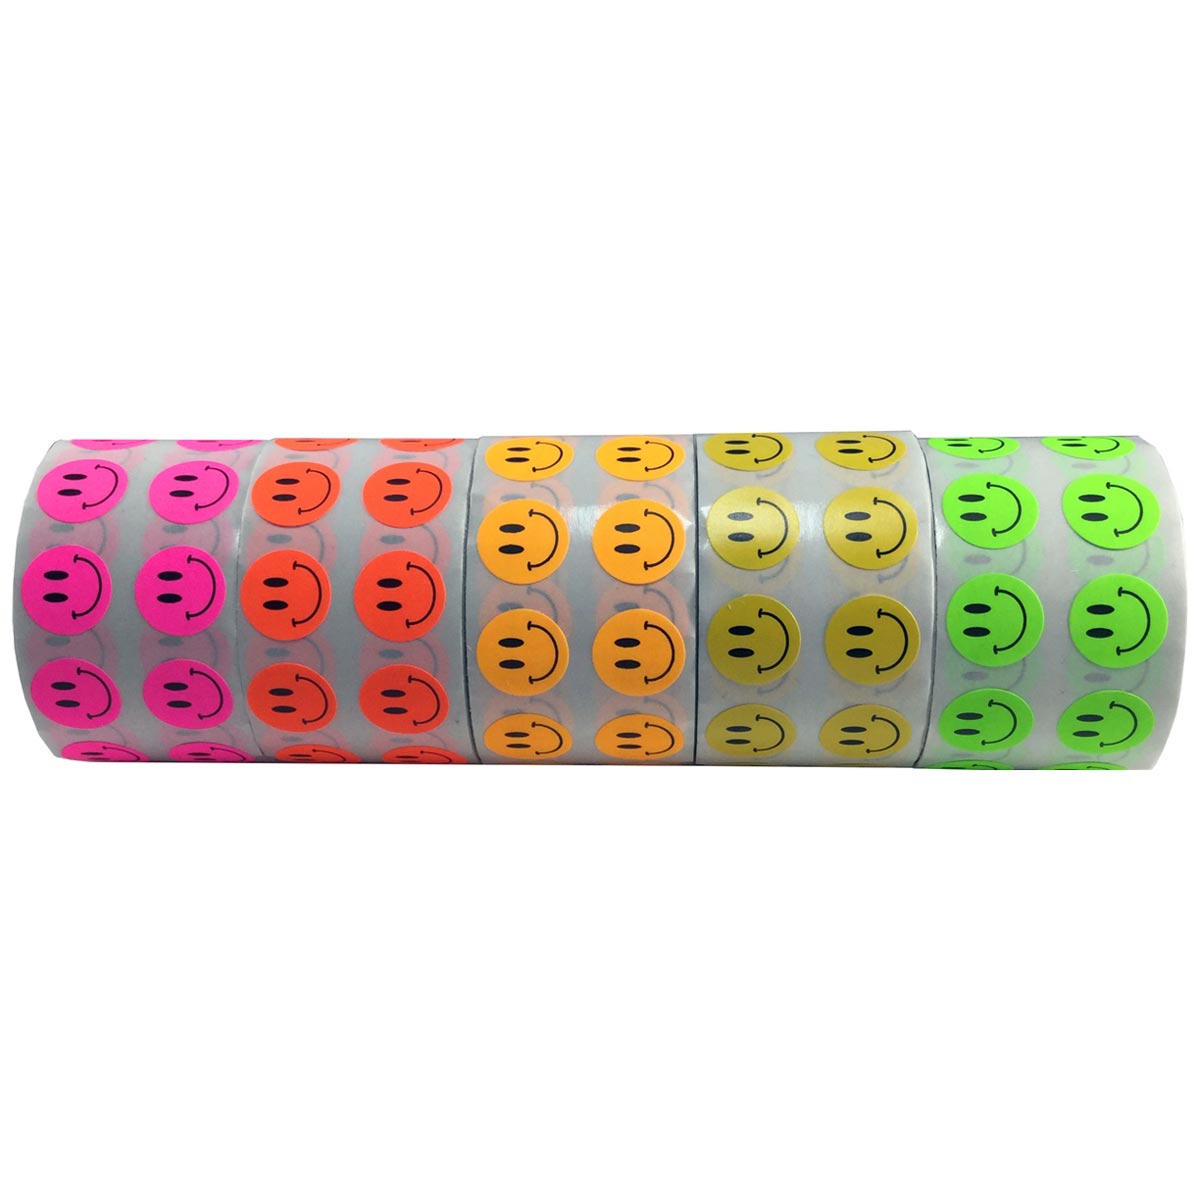 Smiley Face Stickers Paper Roll - 500Pcs Removable Stickers For Kids Roll  Stickers In Bulk Colorful Happy Face Stickers - Self Adhesive Circle Sticker  Label Emoji Stickers For Kids Teaching Supplies 